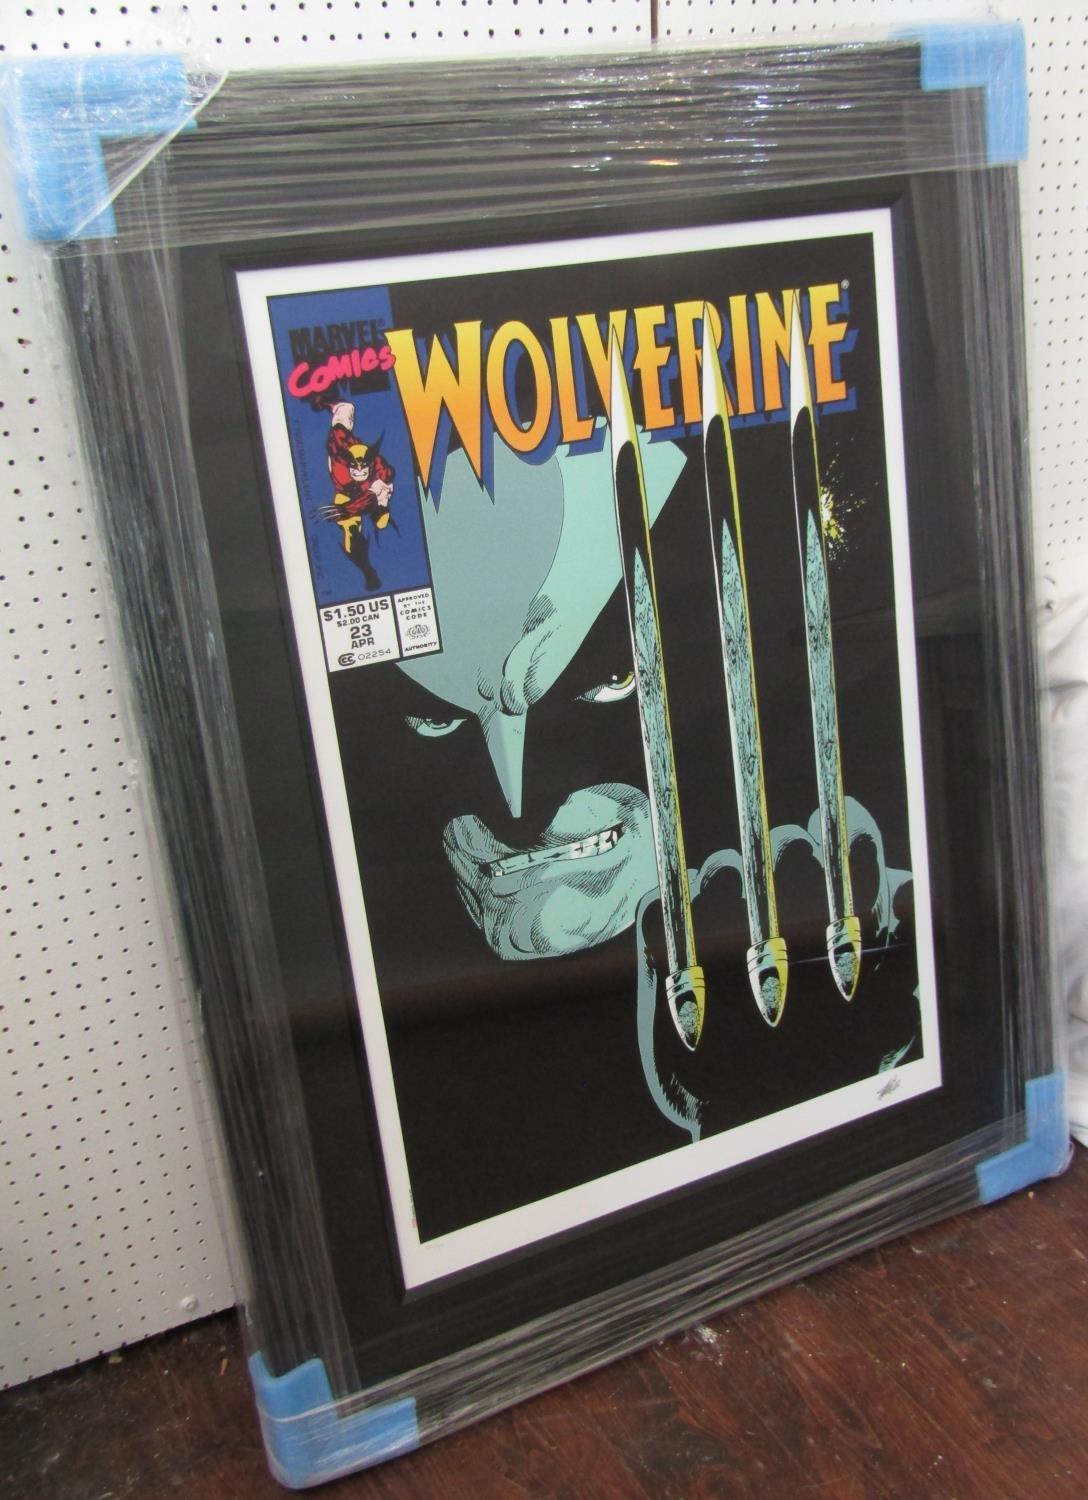 Signed, coloured, limited edition poster of an illustration of Wolverine from Marvel Comics, after